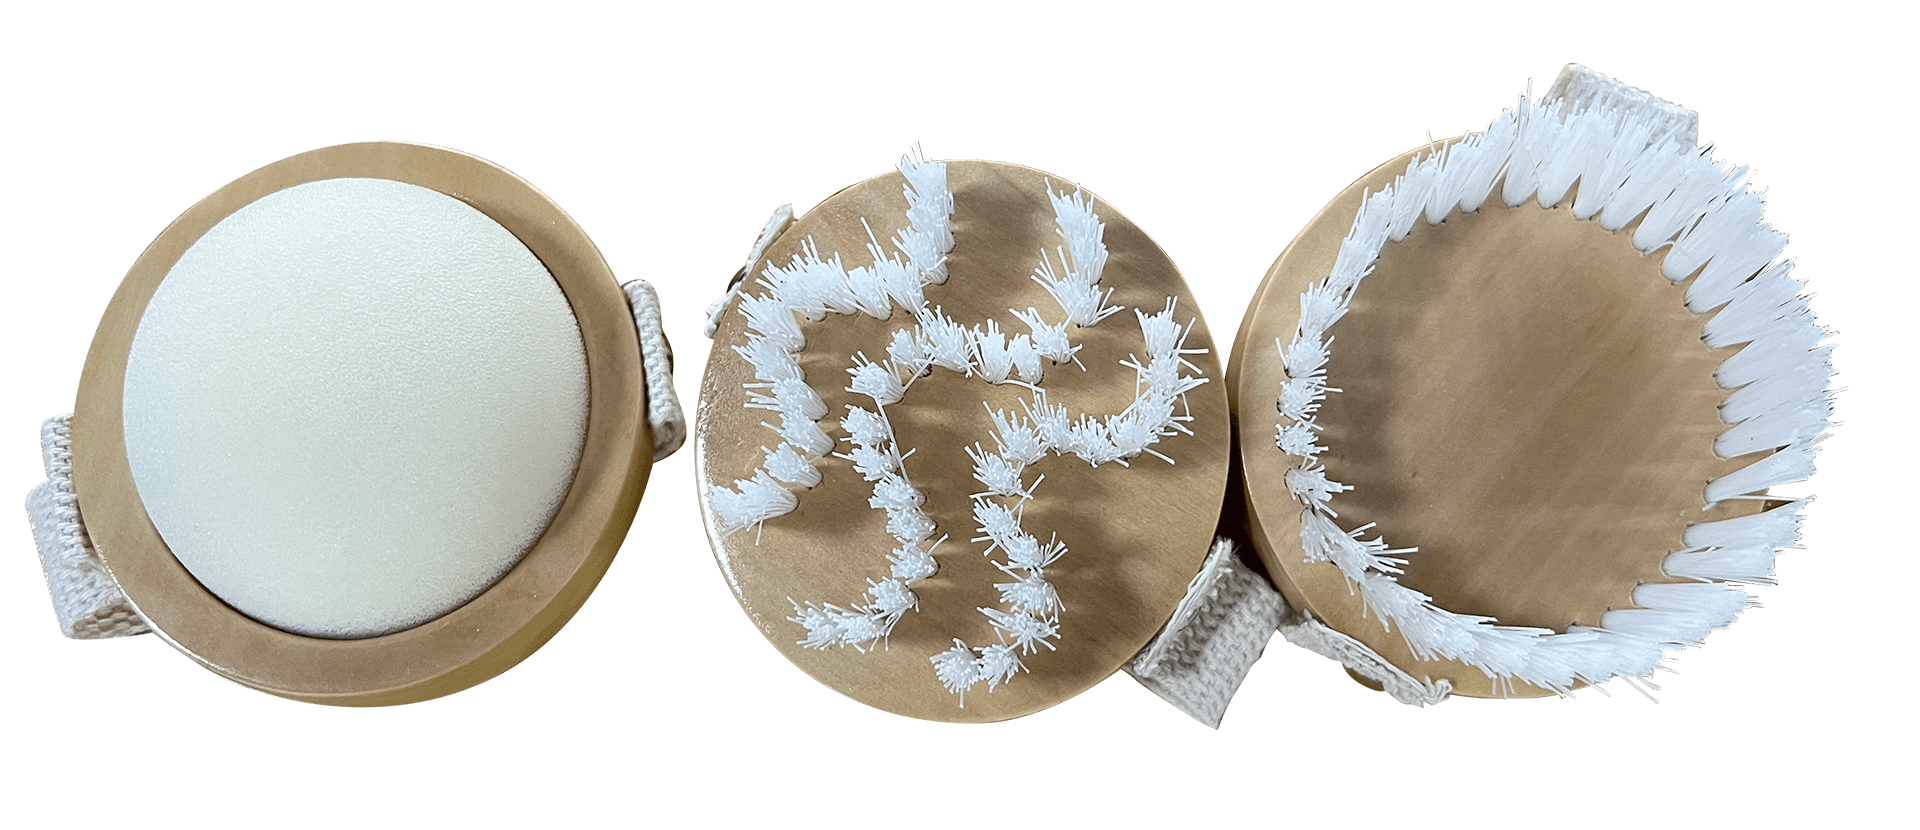 3 Hand Brushes. One features a fabric dauber, another of bristles in wave patterns, and the last of bristles in a ring.